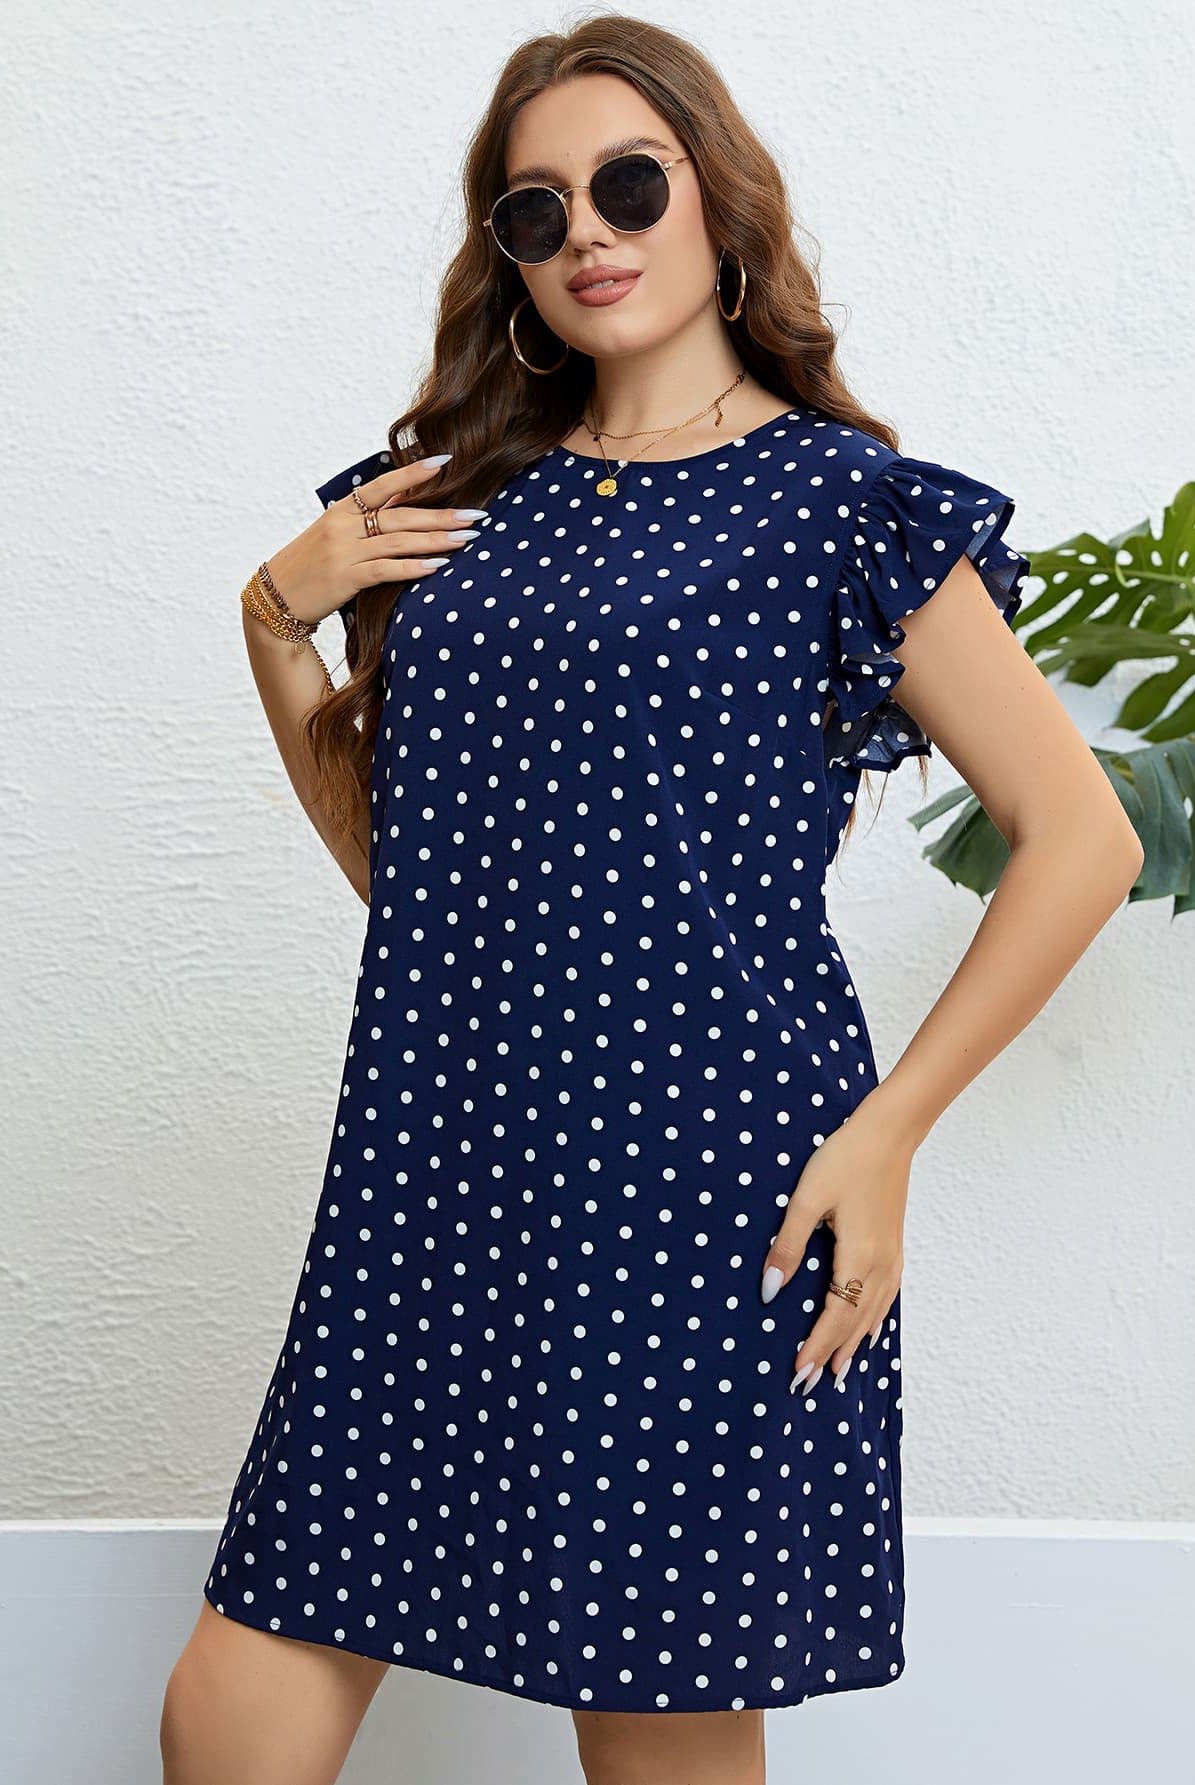 Midnight Blue See You Later Boy Plus Size Polka Dot Round Neck Dress Plus Size Dresses